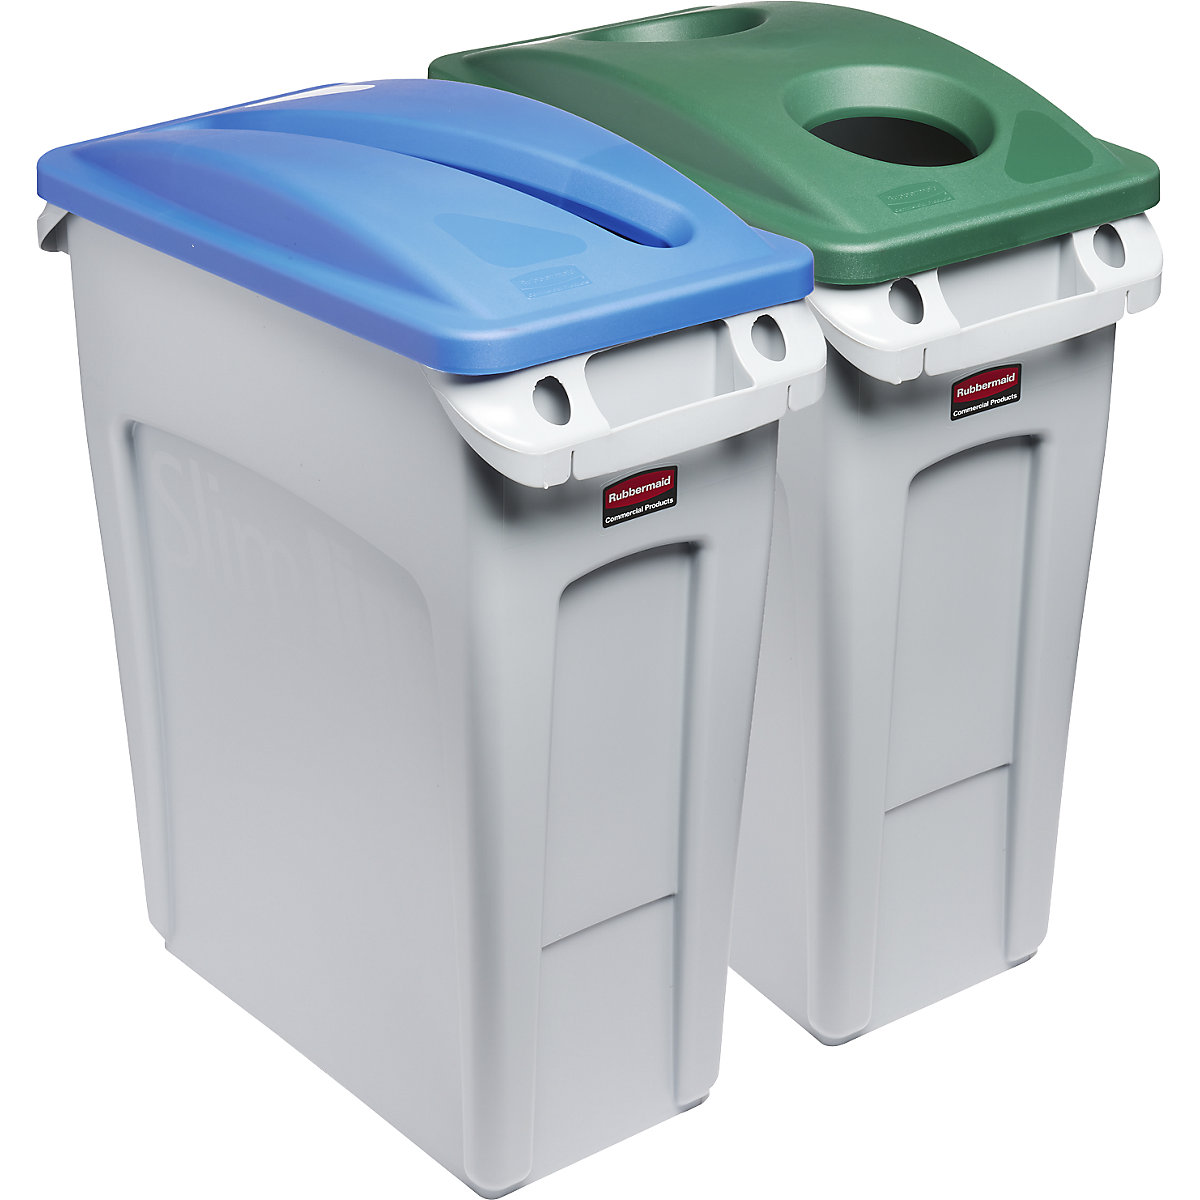 SLIM JIM® recyclable waste collection station, set of 2 – Rubbermaid